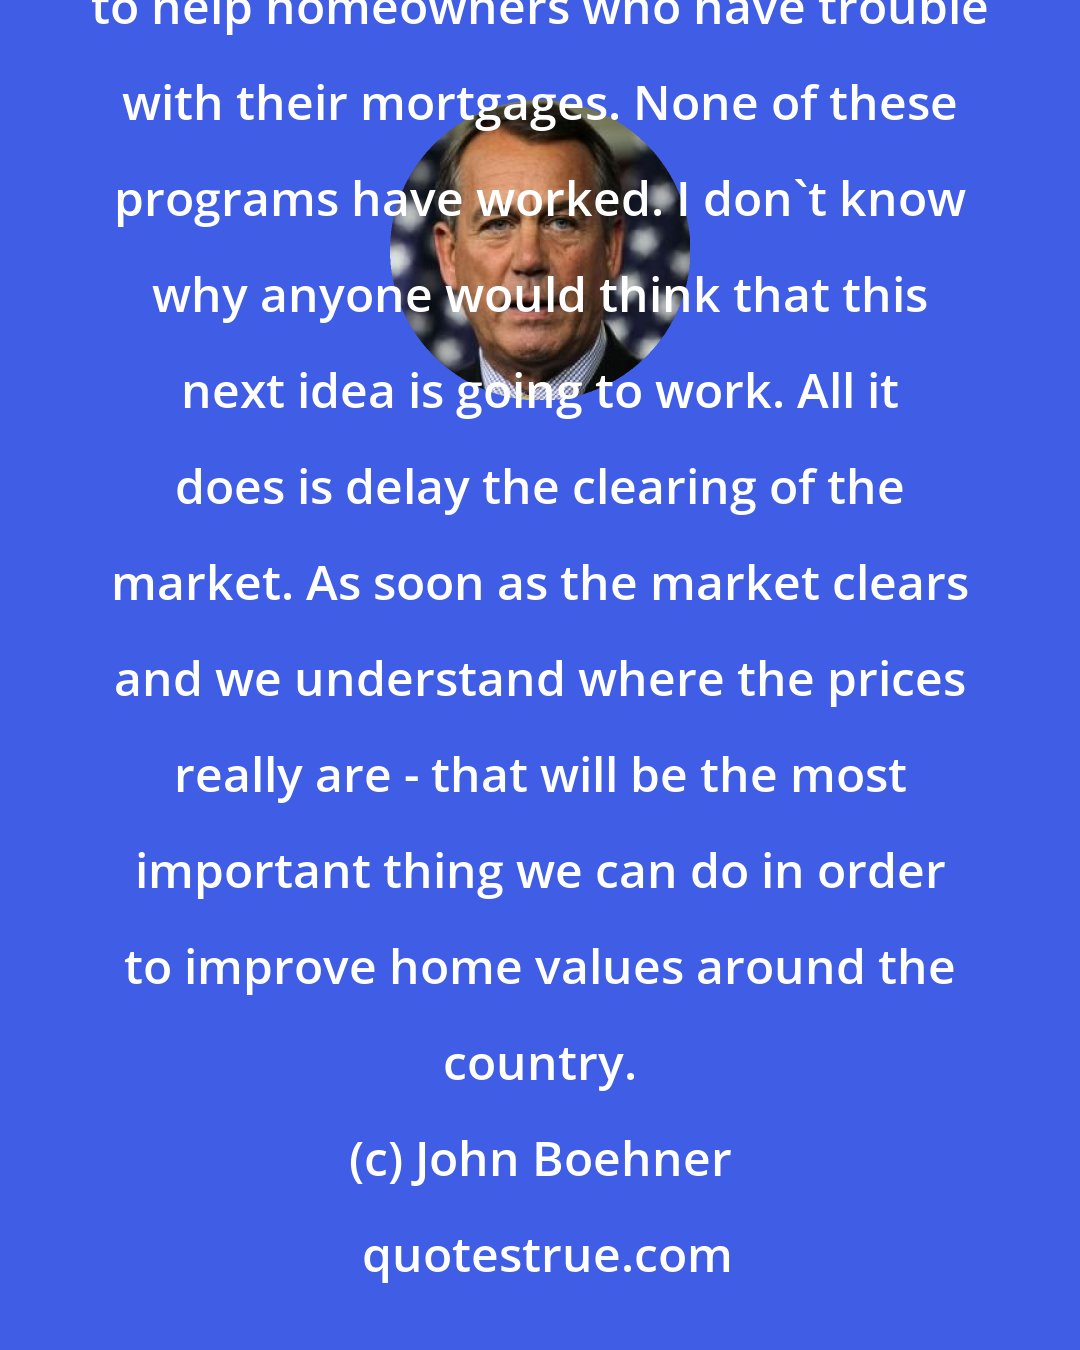 John Boehner: One more time? We've done this. We've done this at least four times where there's a new government program to help homeowners who have trouble with their mortgages. None of these programs have worked. I don't know why anyone would think that this next idea is going to work. All it does is delay the clearing of the market. As soon as the market clears and we understand where the prices really are - that will be the most important thing we can do in order to improve home values around the country.